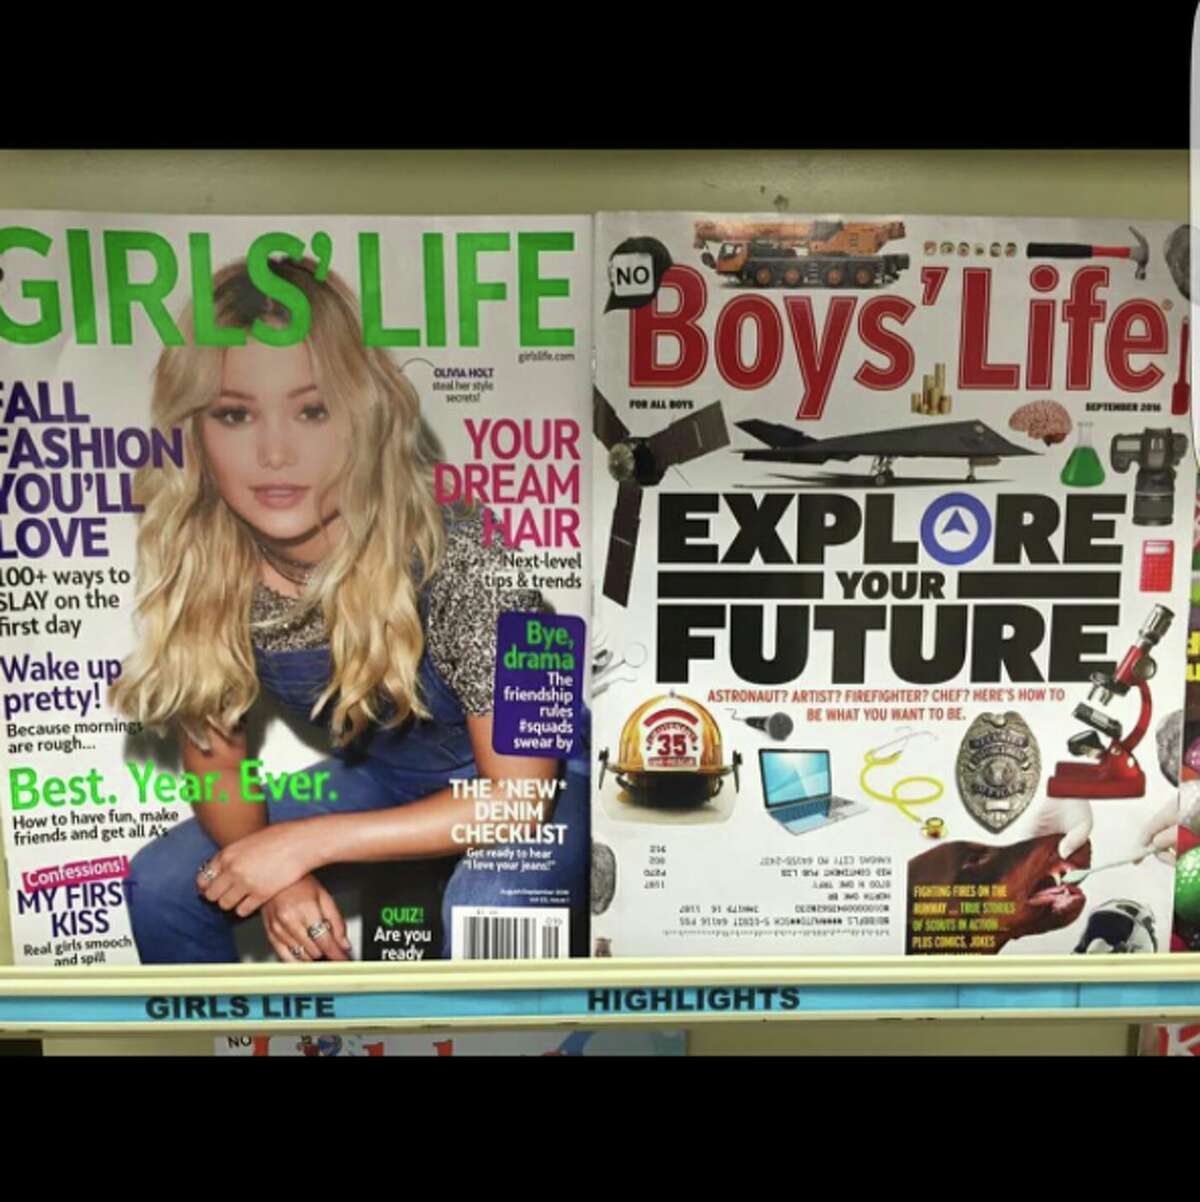 Comedian Amy Schumer posted this viral comparison photo of 'Girls' Life' magazine and 'Boys' Life' magazine to her Instagram account on September 20, 2016. She captioned the photo, "No." (www.instagram.com/amyschumer/)